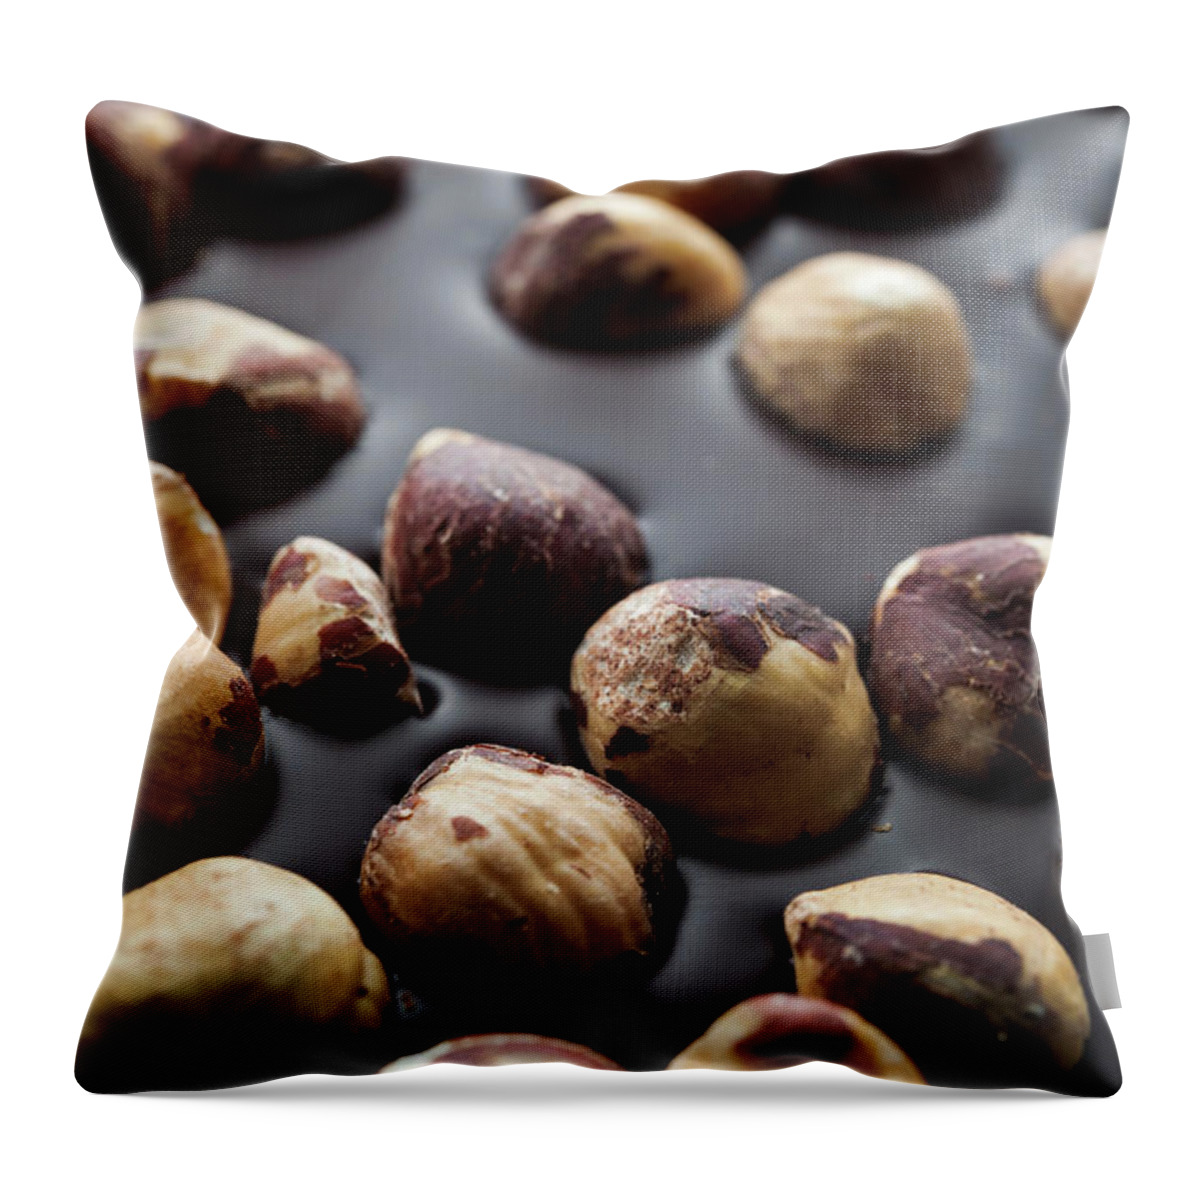 Chocolate Throw Pillow featuring the photograph Artisanal chocolate with hazelnuts by Elena Elisseeva